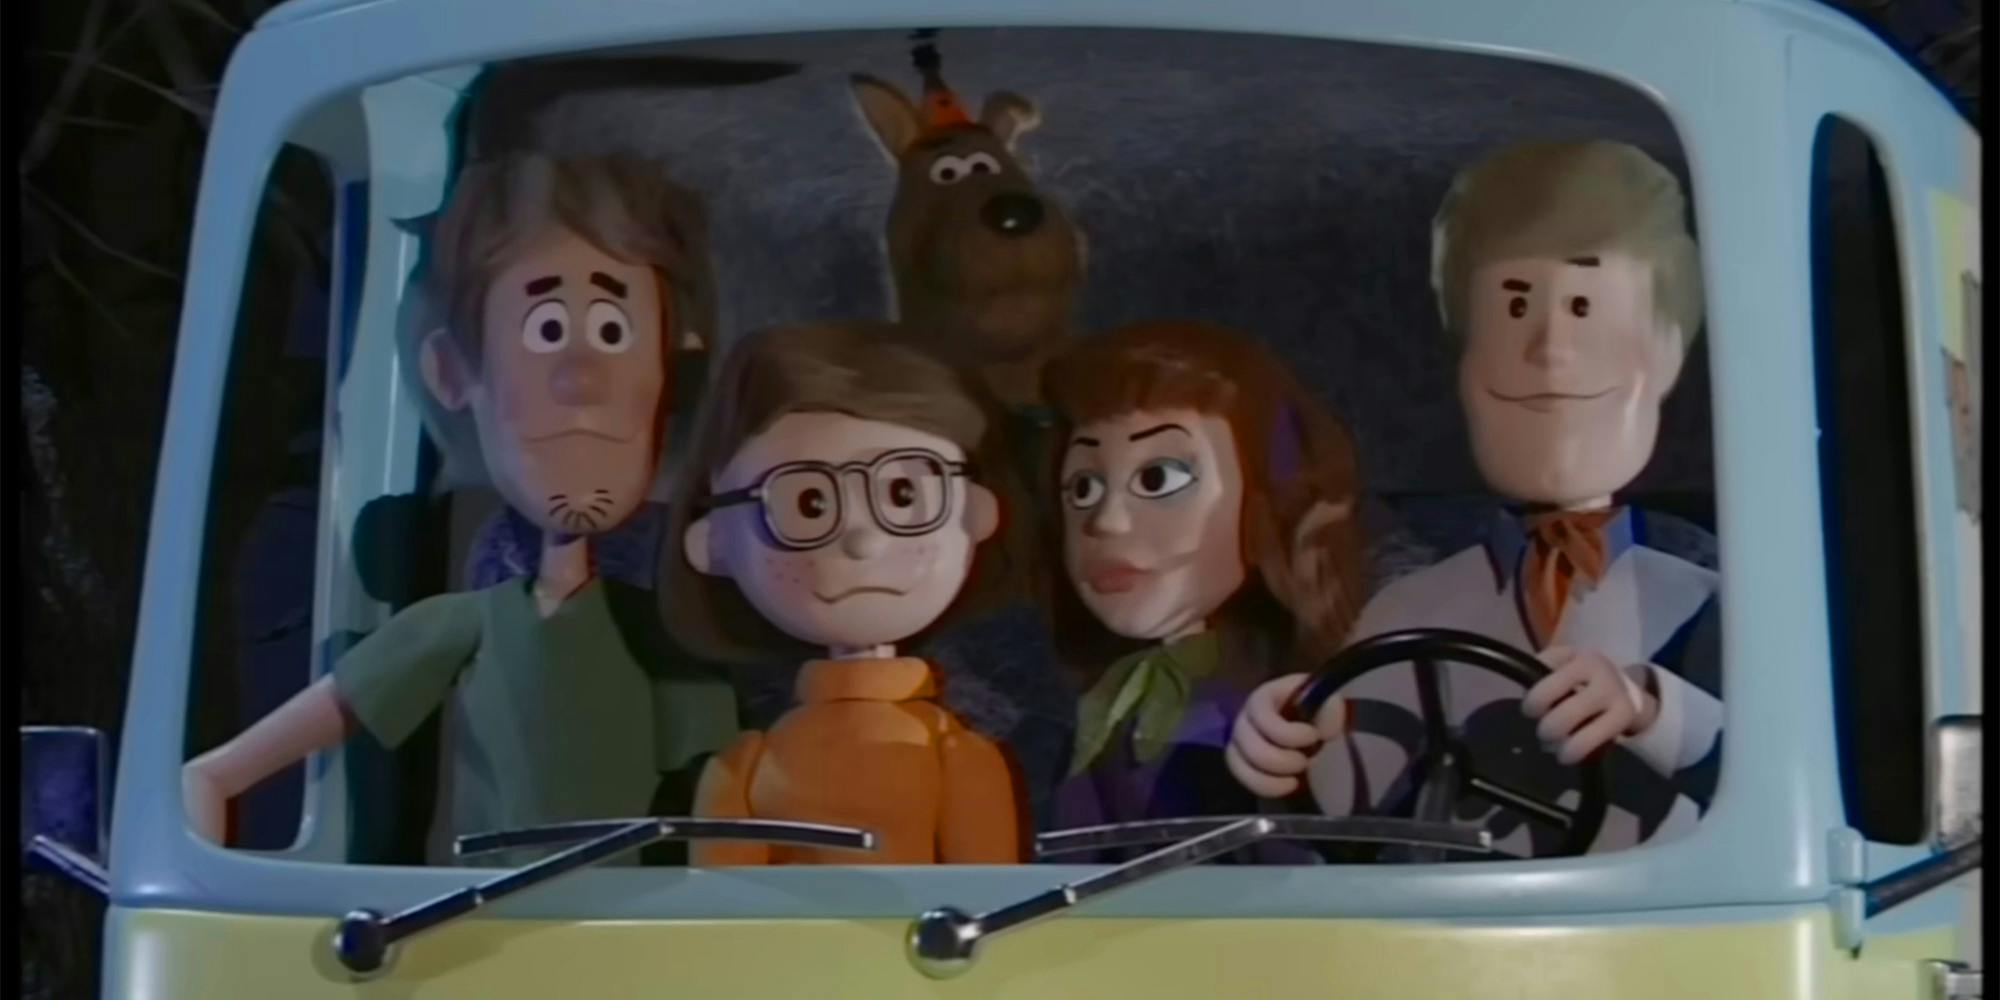 A Fan Wanted To Make a Scooby-Doo Cartoon, But Ended Up Sparking an AI Debate